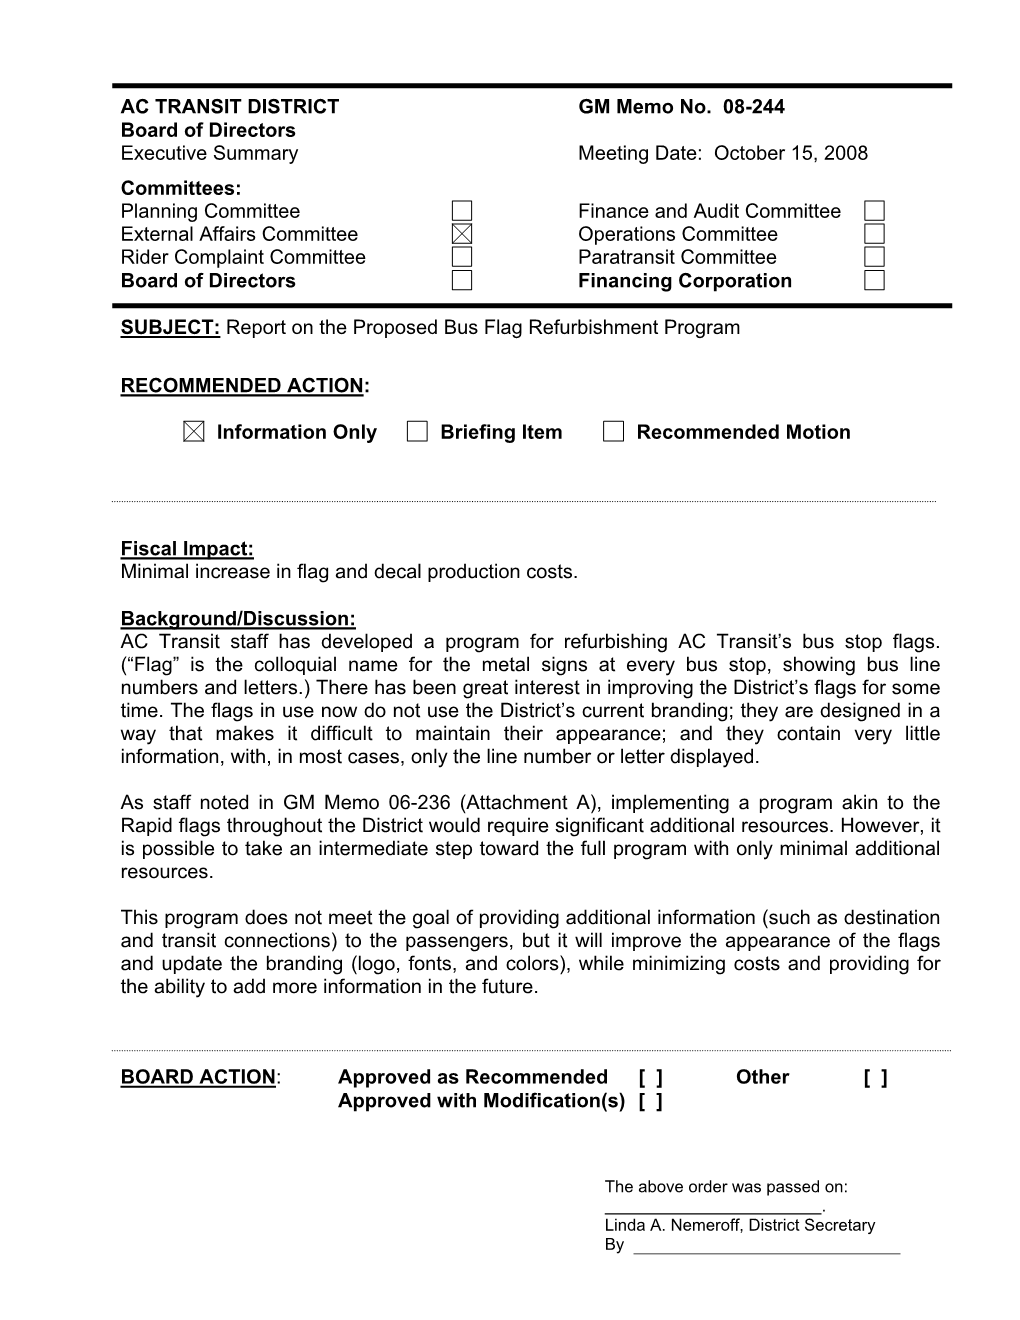 AC TRANSIT DISTRICT GM Memo No. 08-244 Board of Directors Executive Summary Meeting Date: October 15, 2008